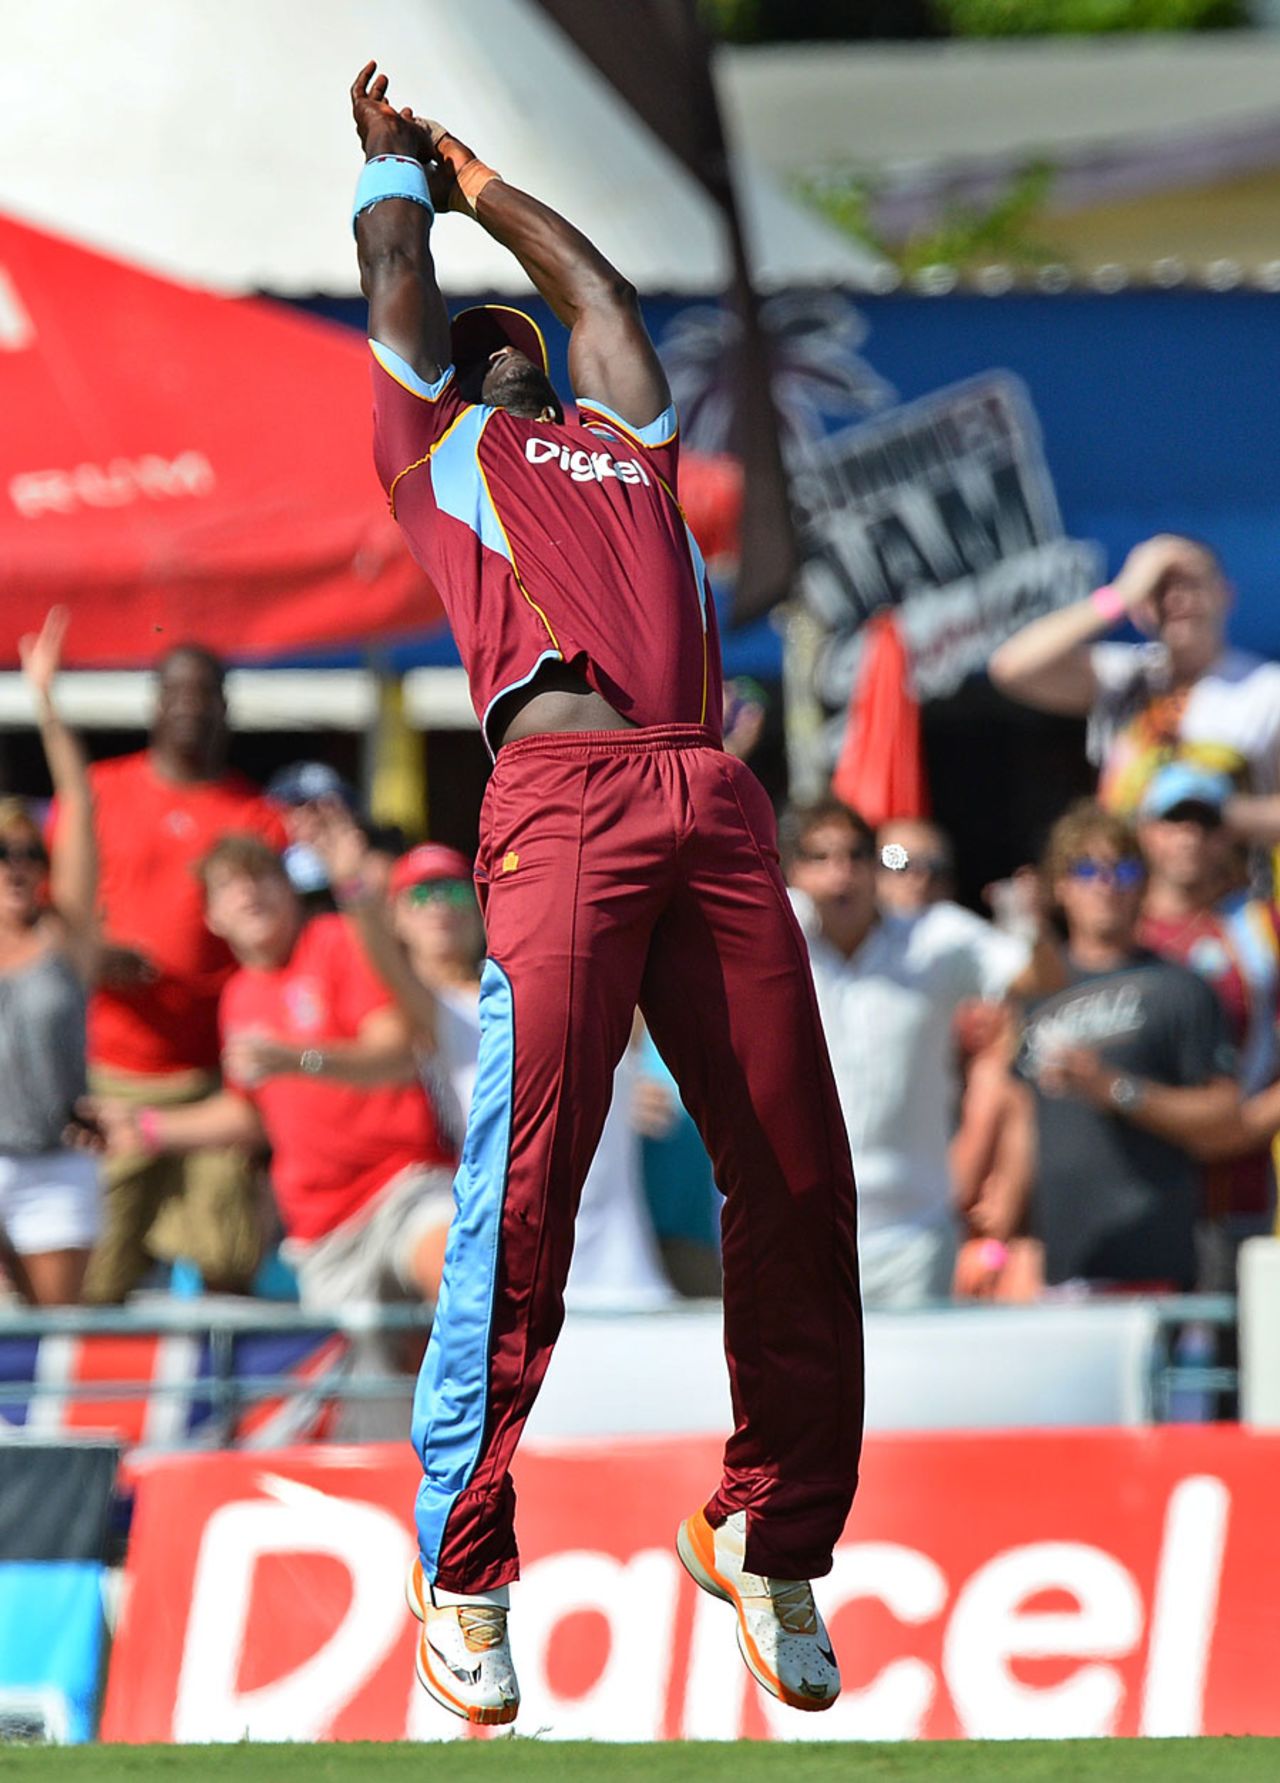 Darren Sammy clings onto a catch to remove Jos Buttler, West Indies v England, 3rd T20, Barbados, March 13, 2014